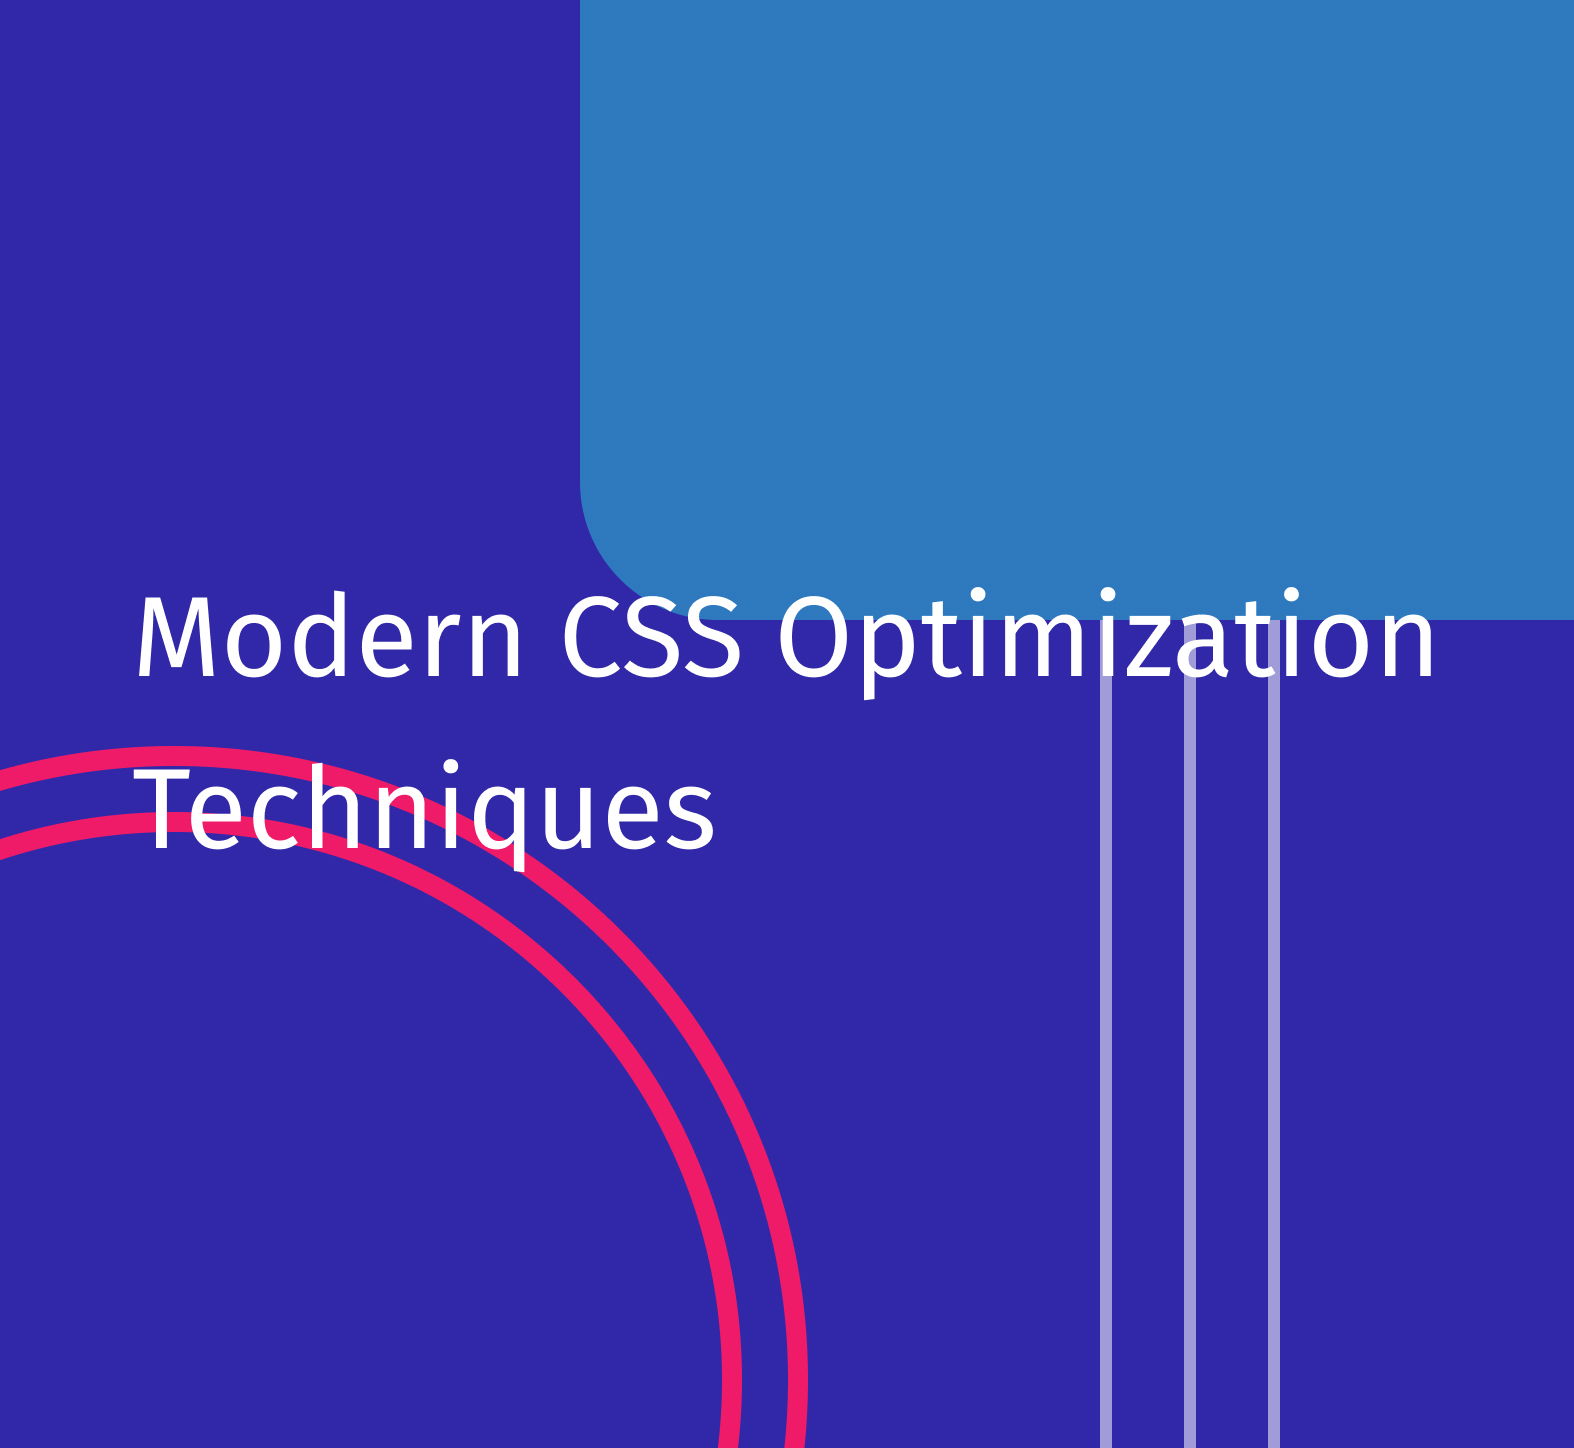 Modern CSS Optimization Techniques Every Developer Should Know